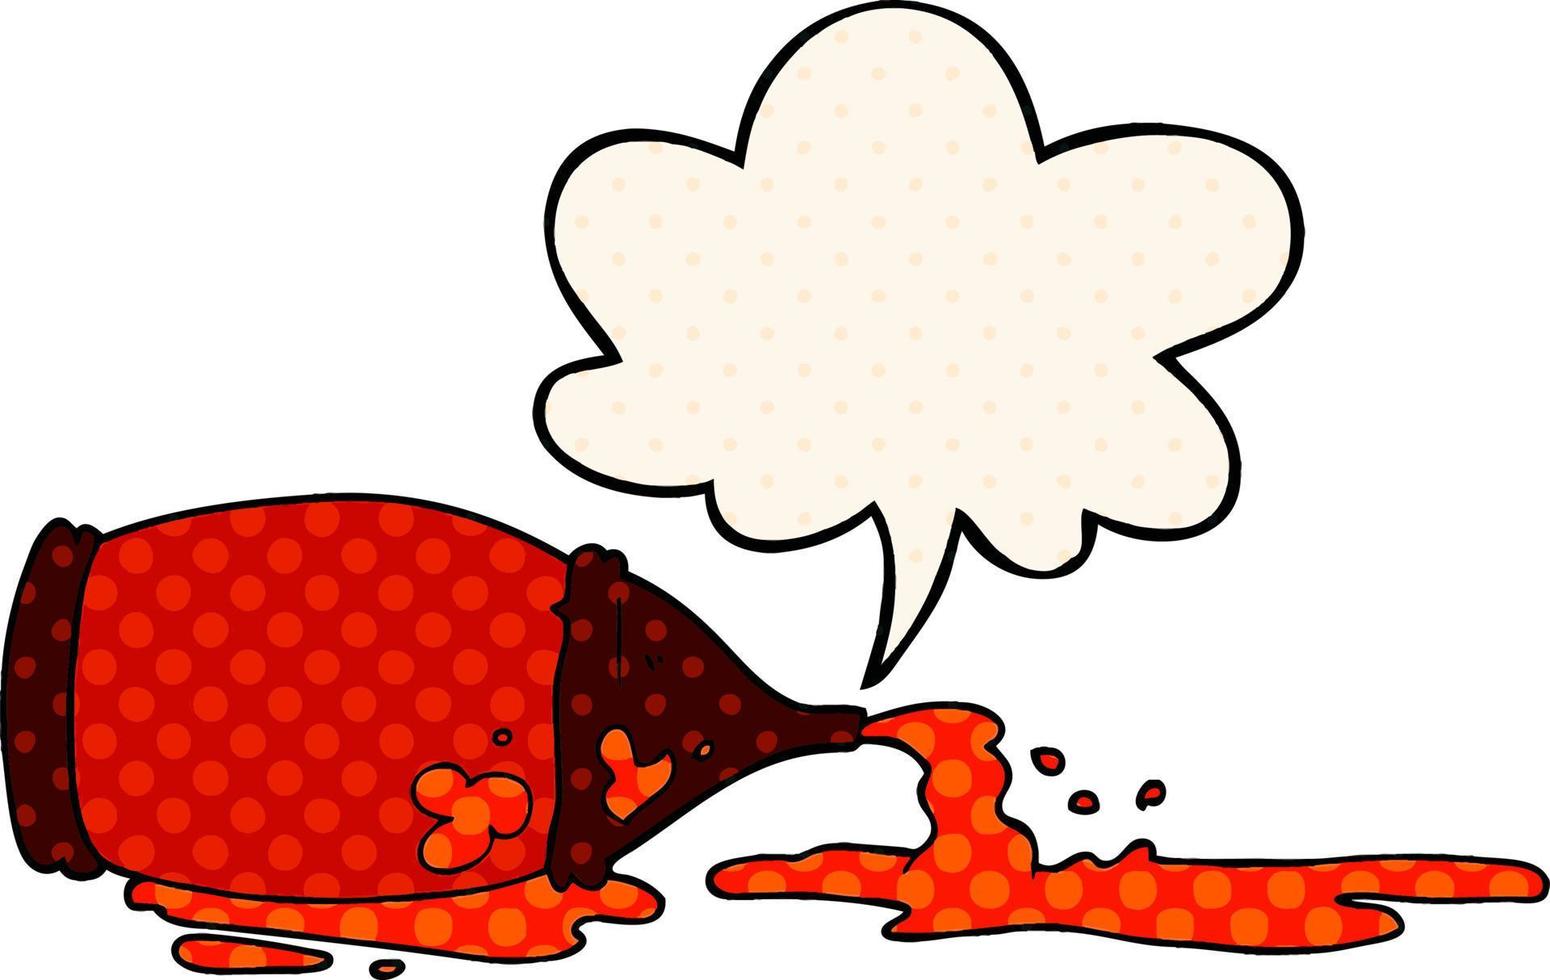 cartoon spilled ketchup bottle and speech bubble in comic book style vector